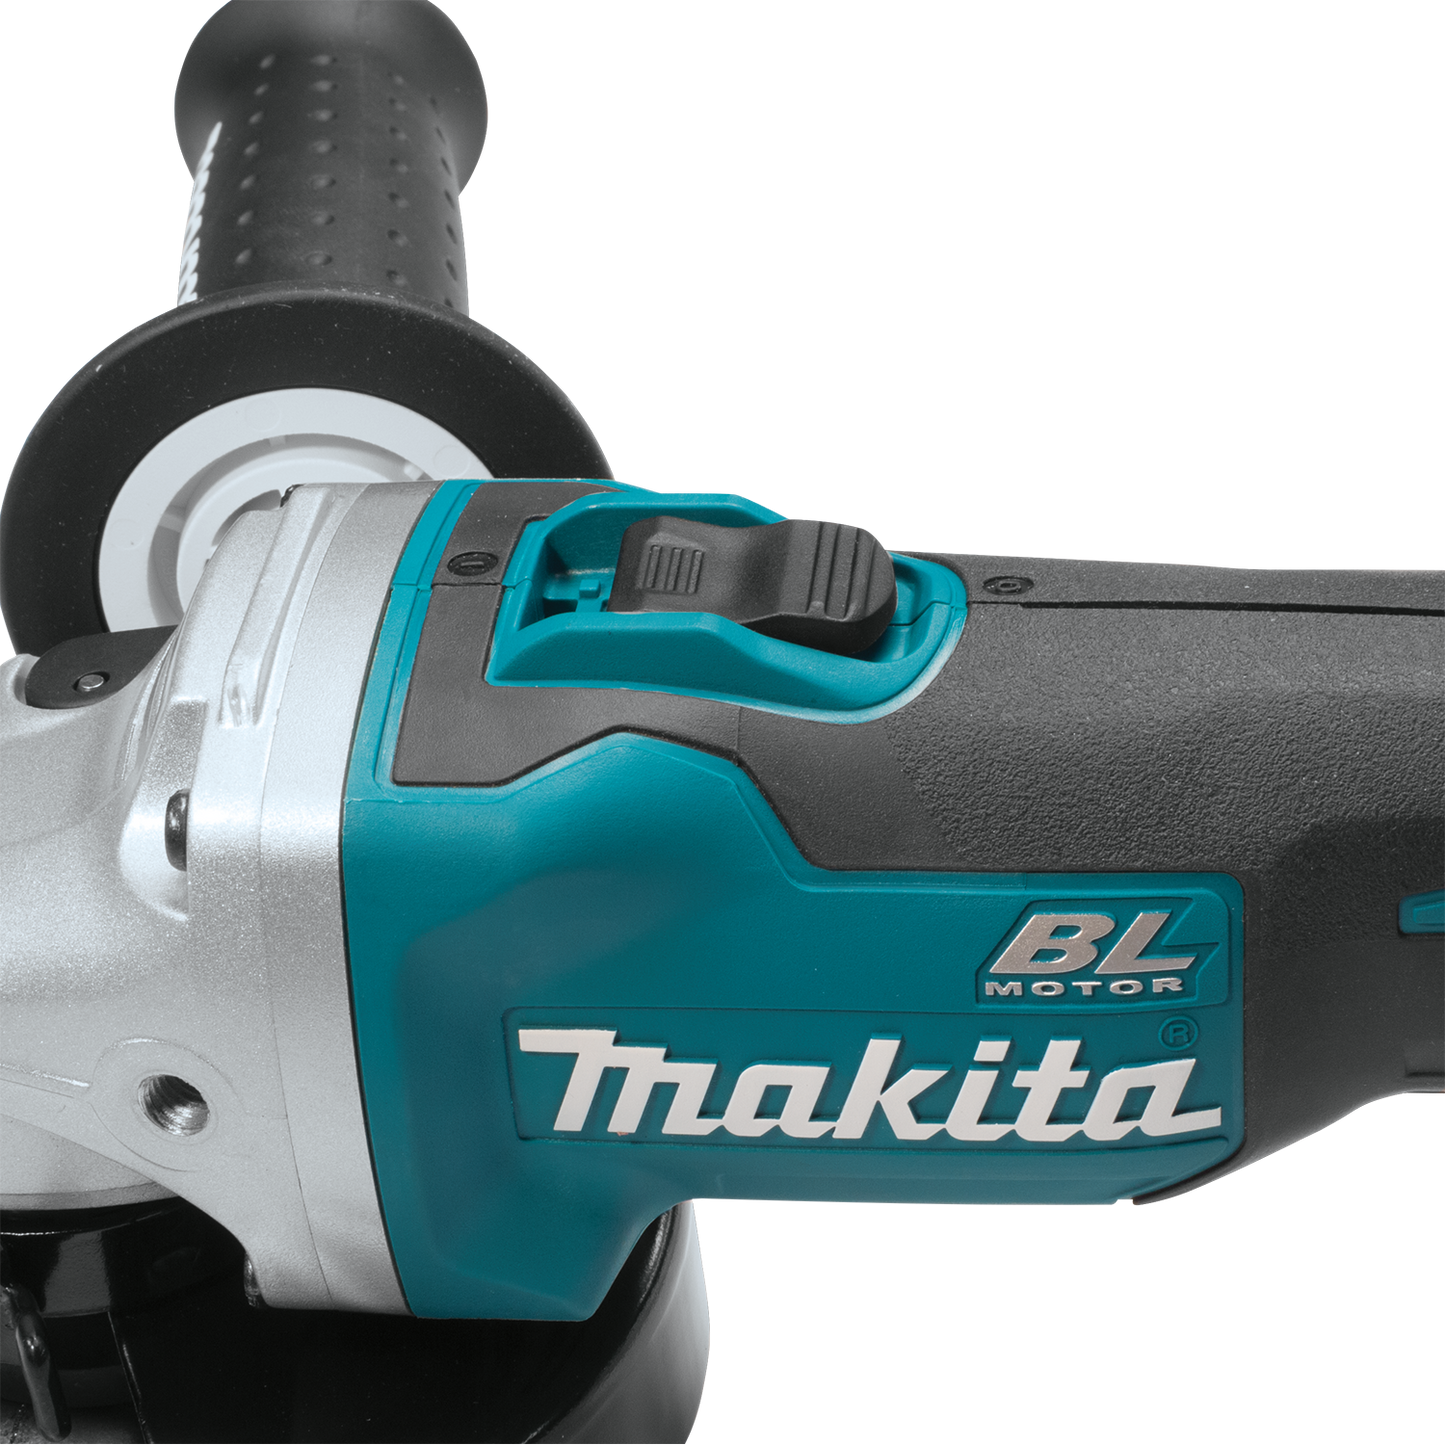 Makita 4 1/2 Inch Cut Off/Angle Grinder Tool Only Factory Serviced